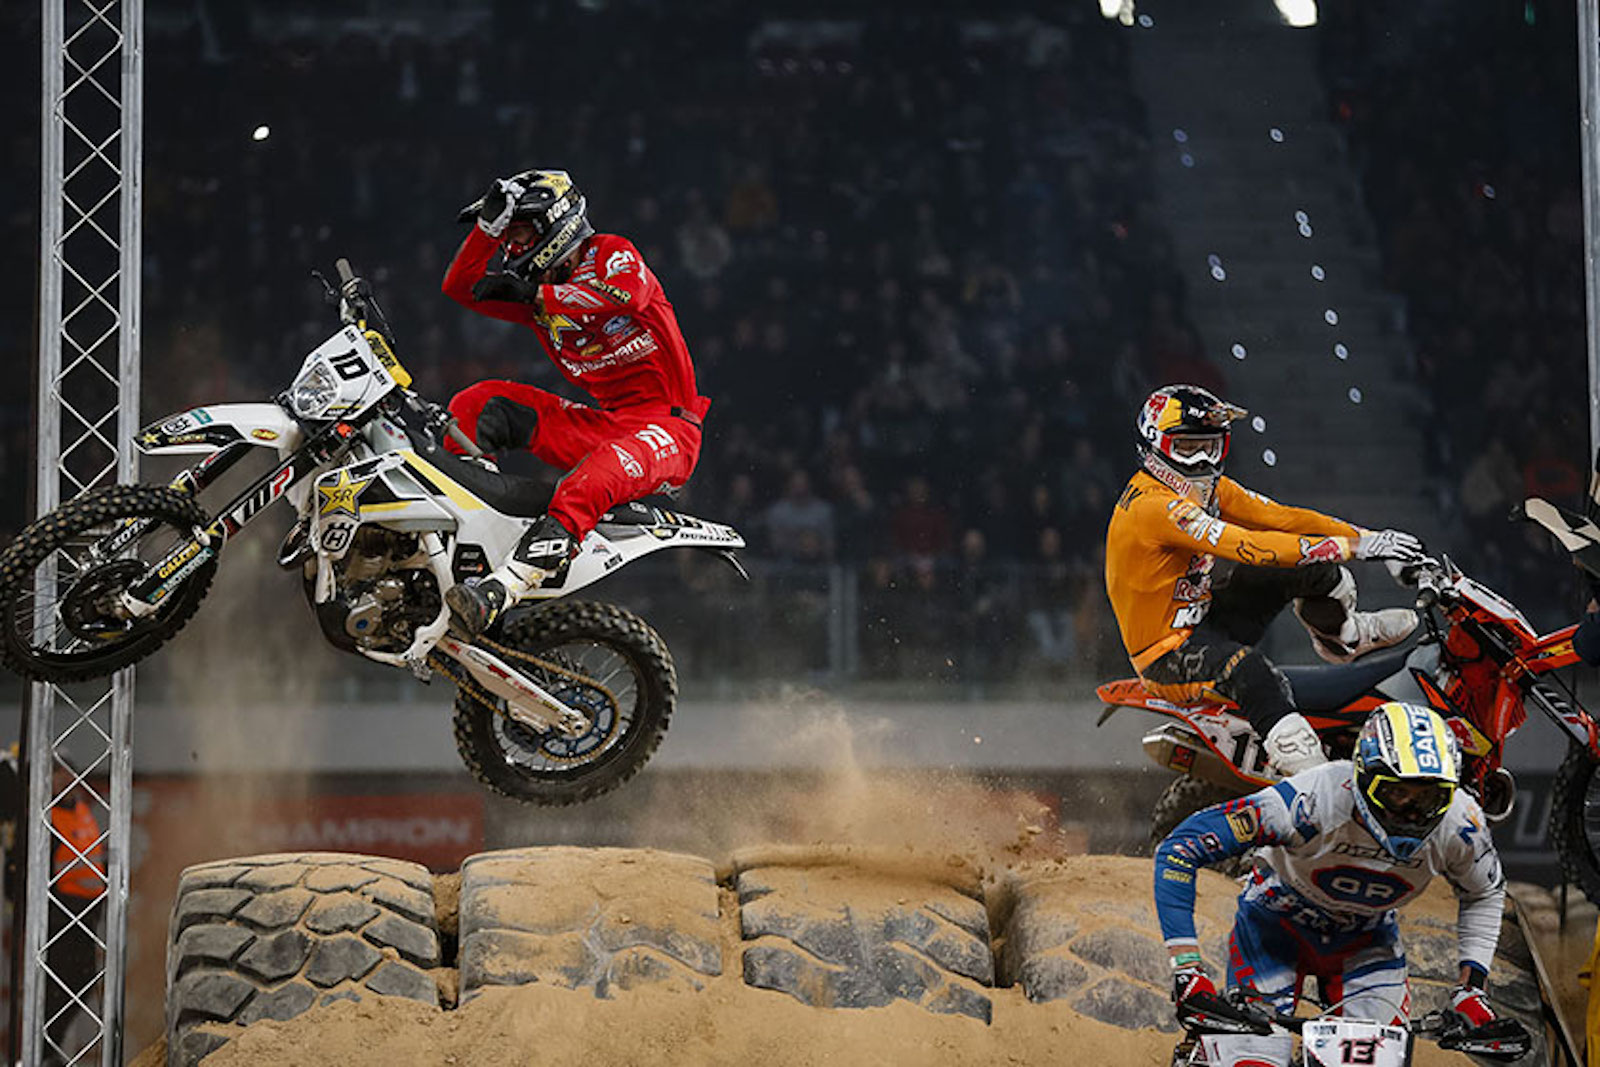 Haaker and Blazusiak head-to-head for 2019 EnduroCross title this weekend